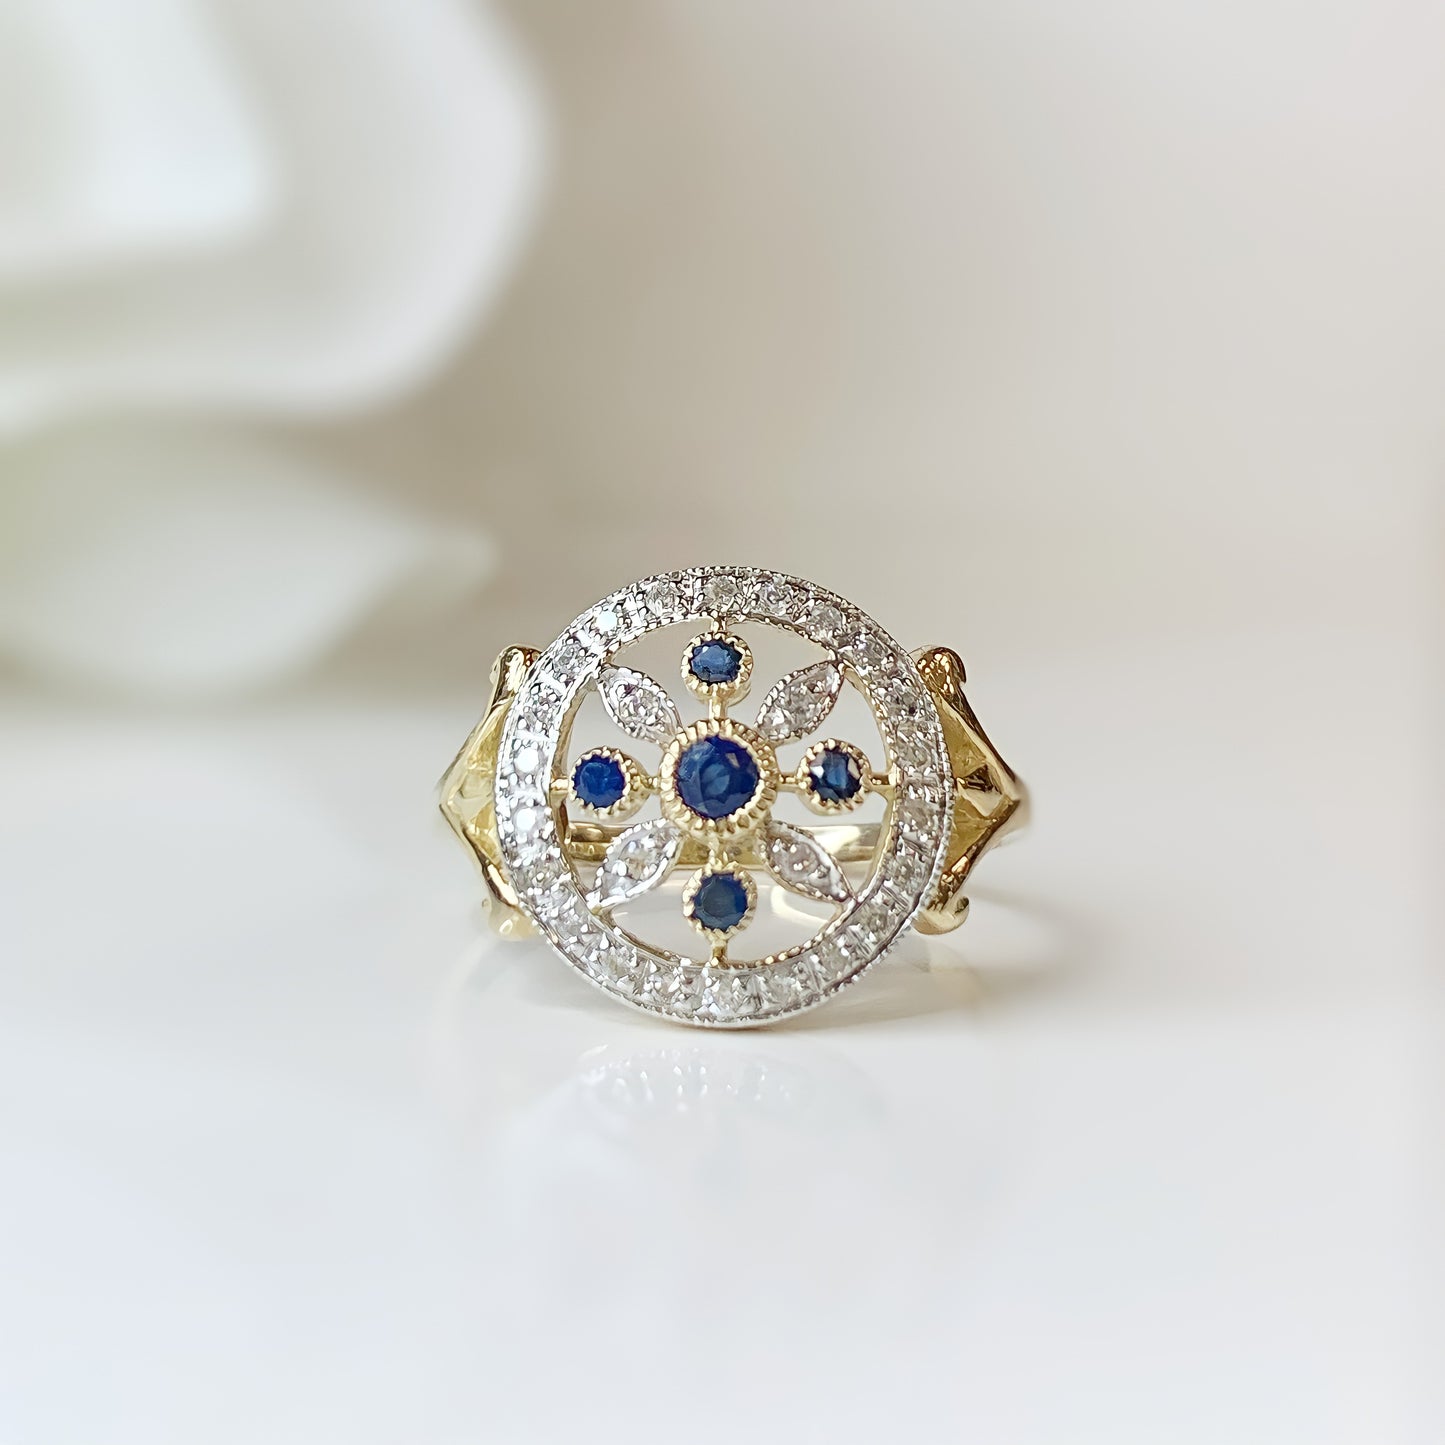 Victorian Inspired 9ct Yellow Gold Sapphire and Diamond Ring – SIZE L1/2